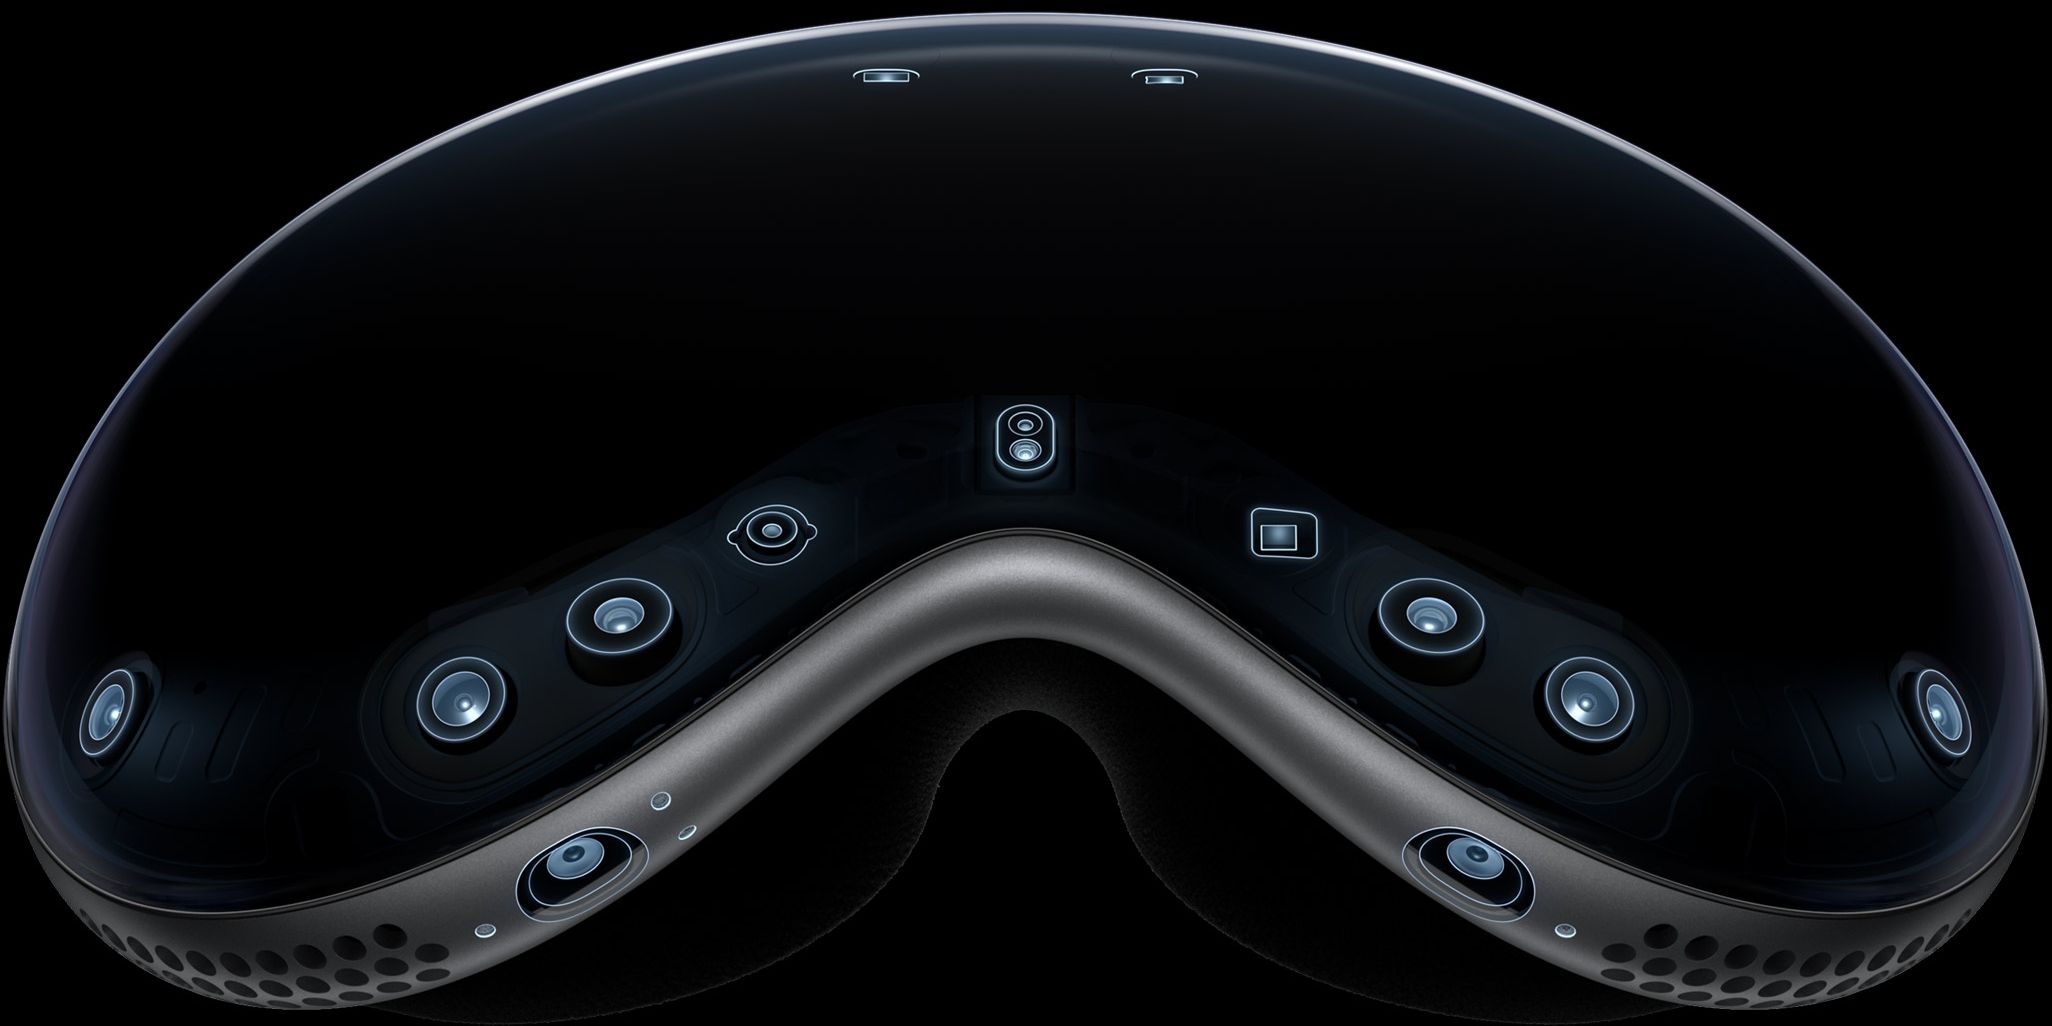 Highlights of the external sensors, cameras and microphones on the Vision Pro headset